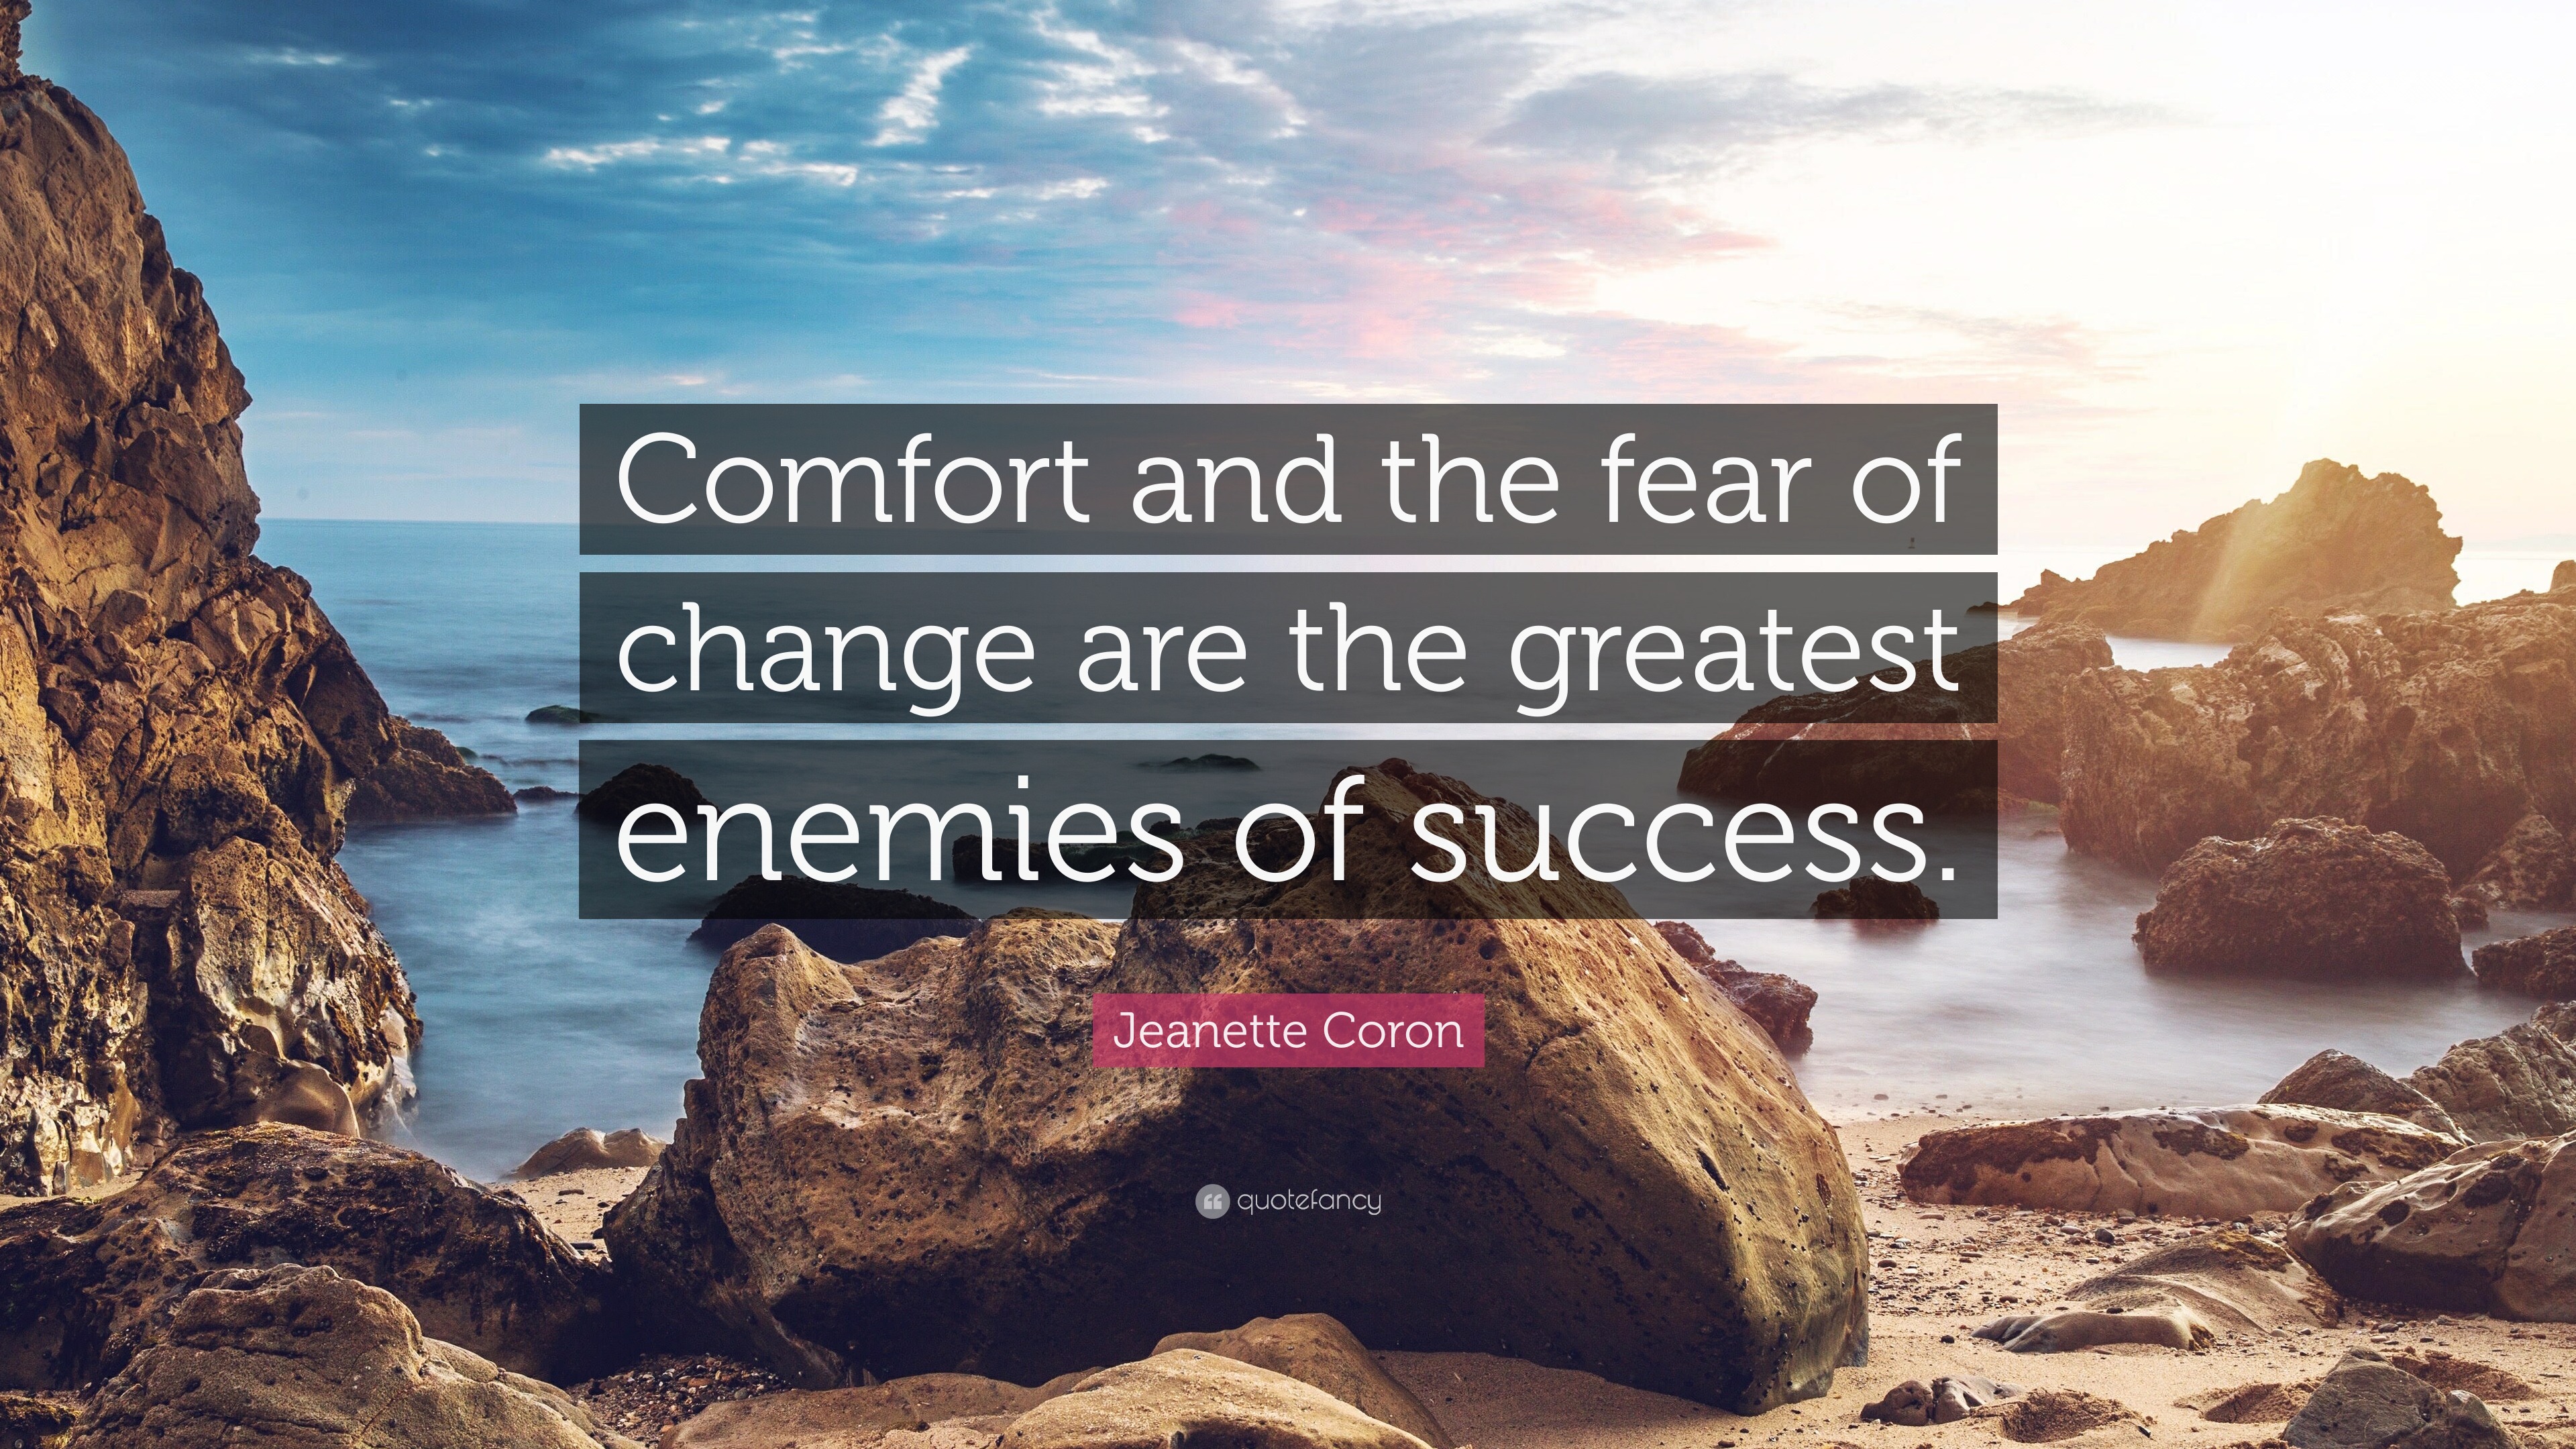 The Enemy of Success Isn't Failure; It's Comfort!